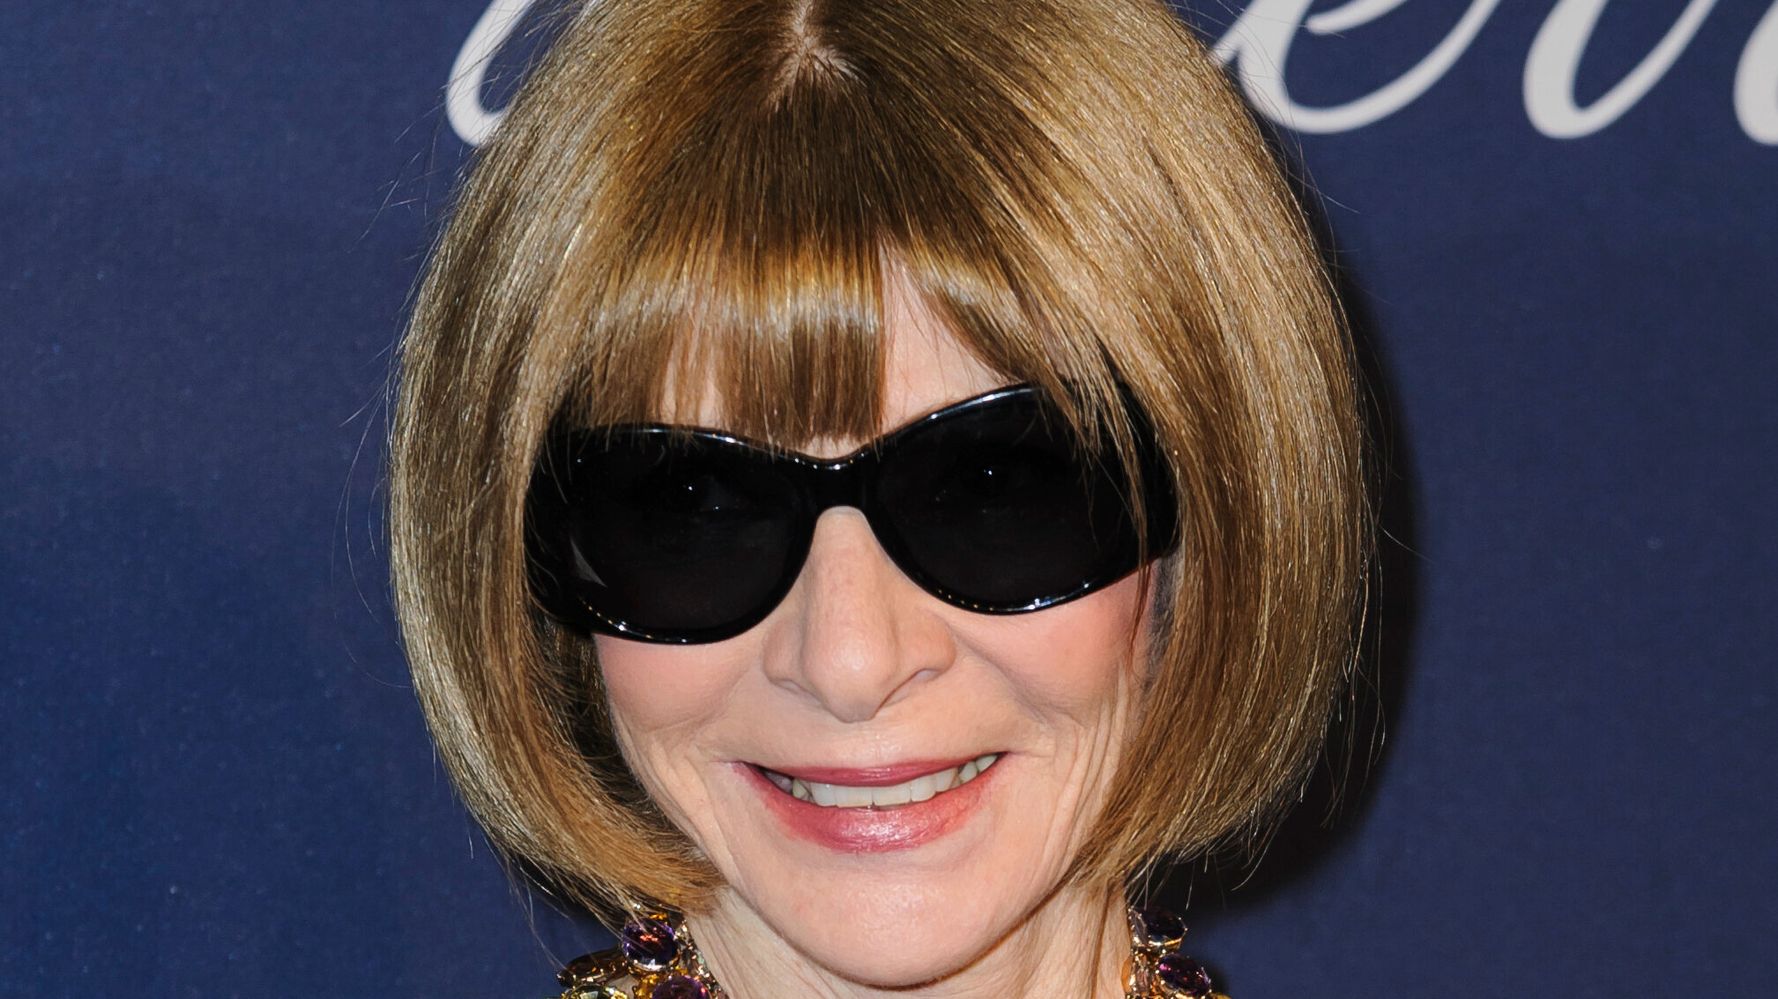 Anna Wintour Apologizes For Race-Related 'Mistakes' In Vogue Magazine ...